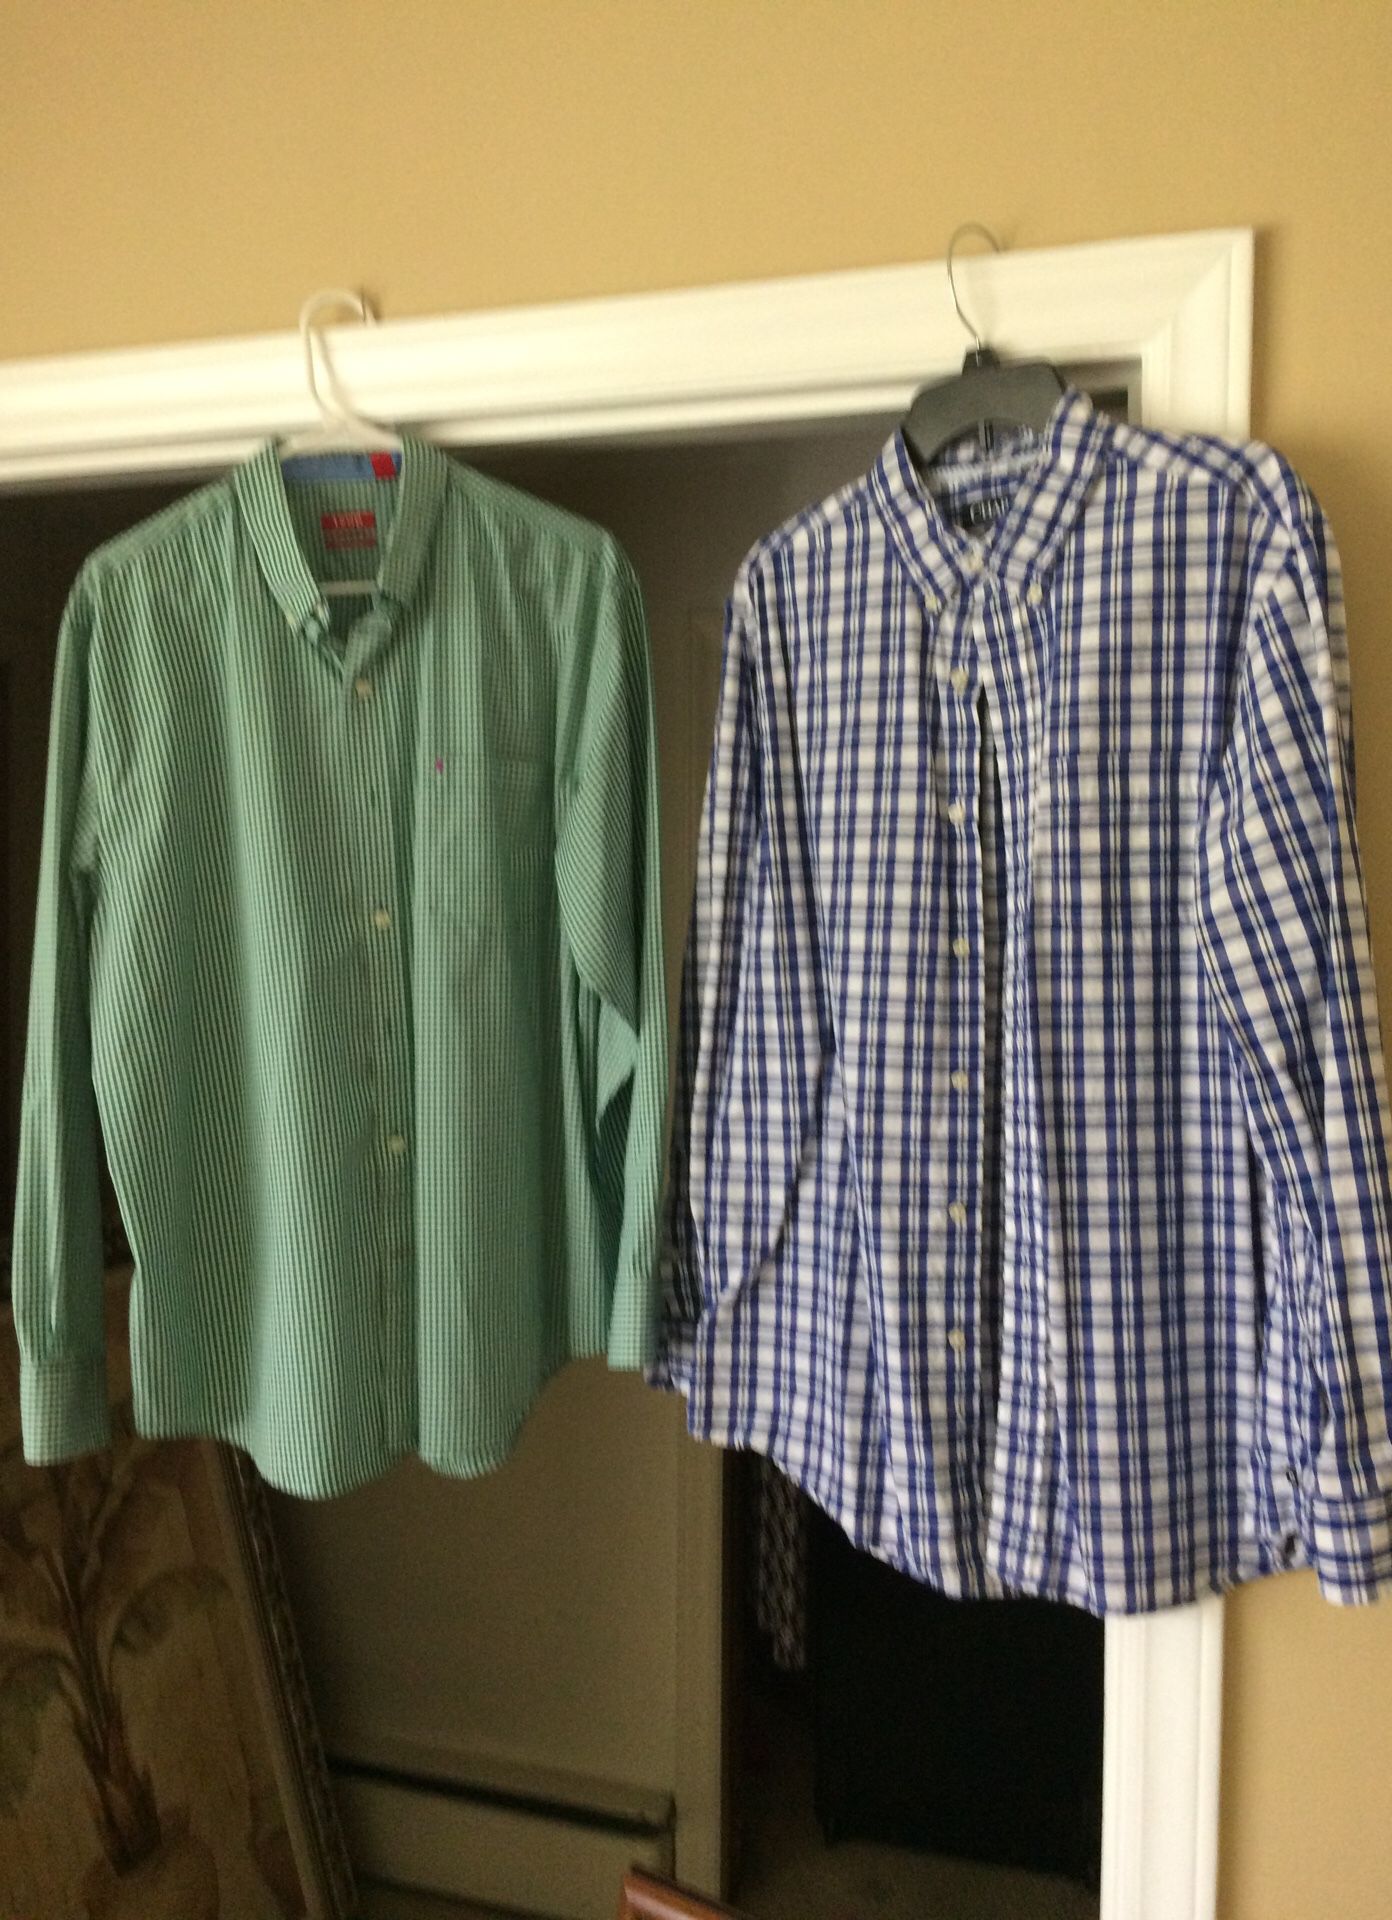 Izod and chaps long sleeve dress shirts, Both For $15